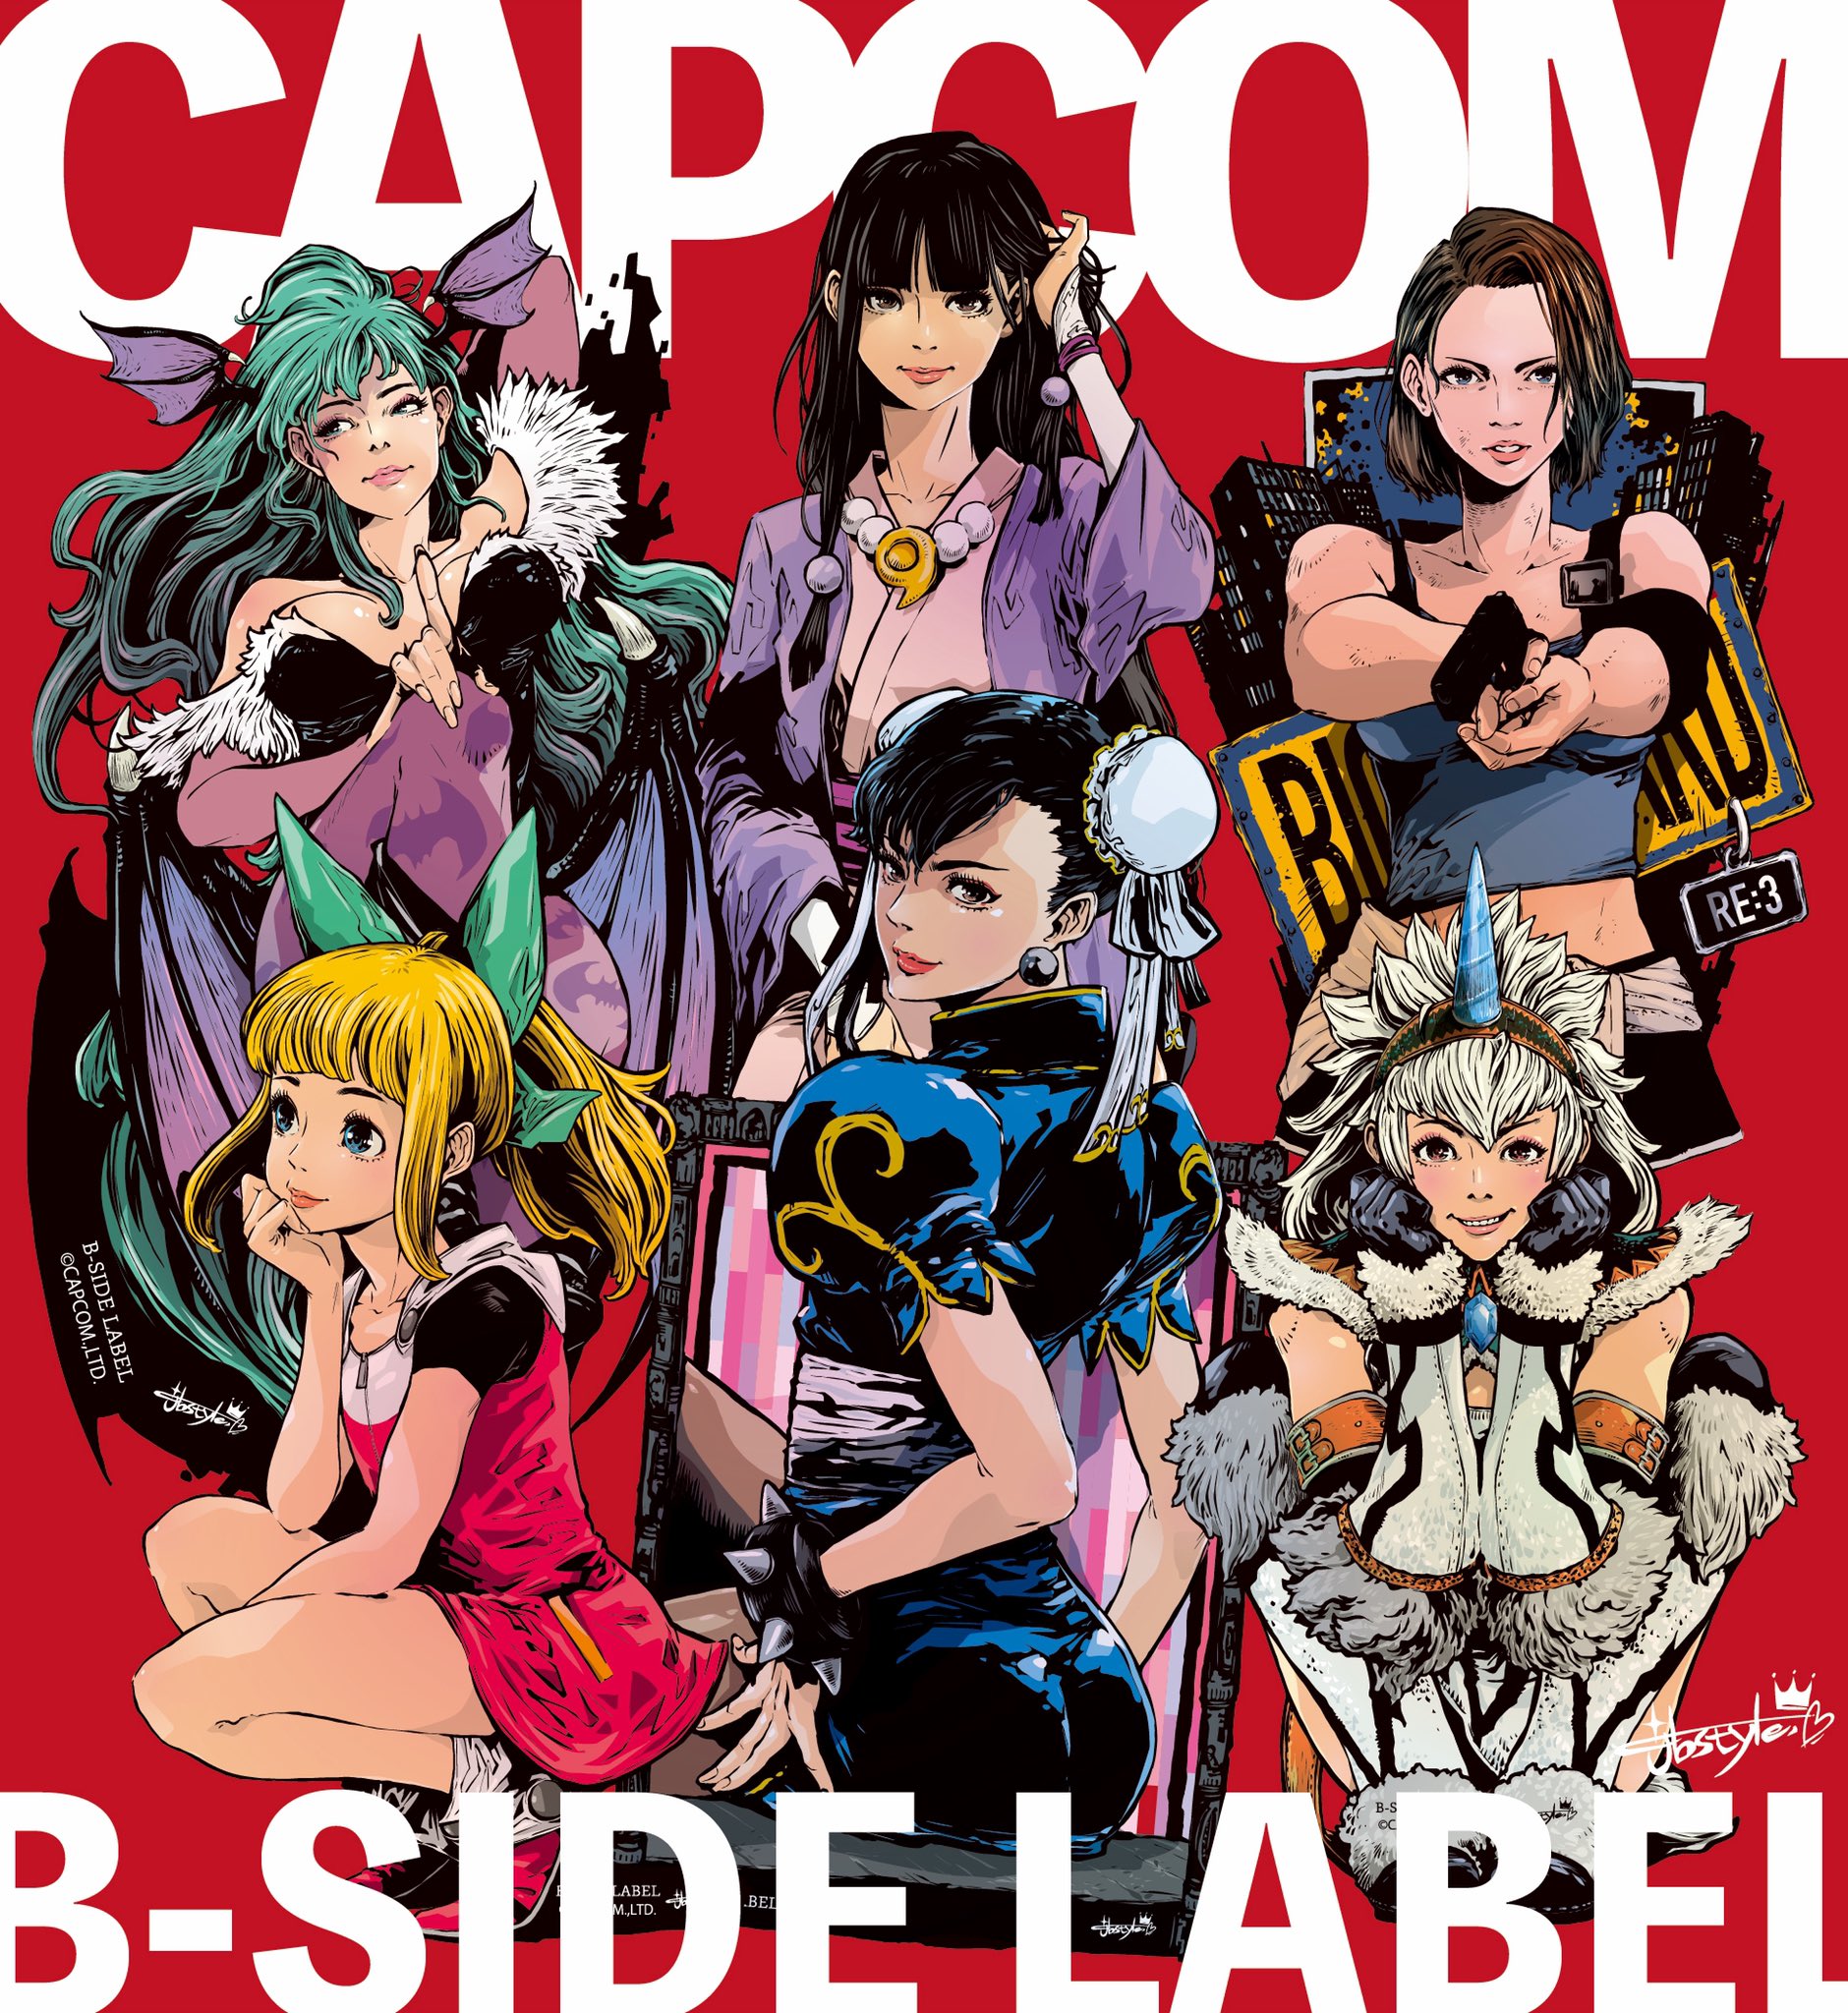 Jbstyle Draws Capcom Girls In New B Side Label Collab Tfg Fighting Game News